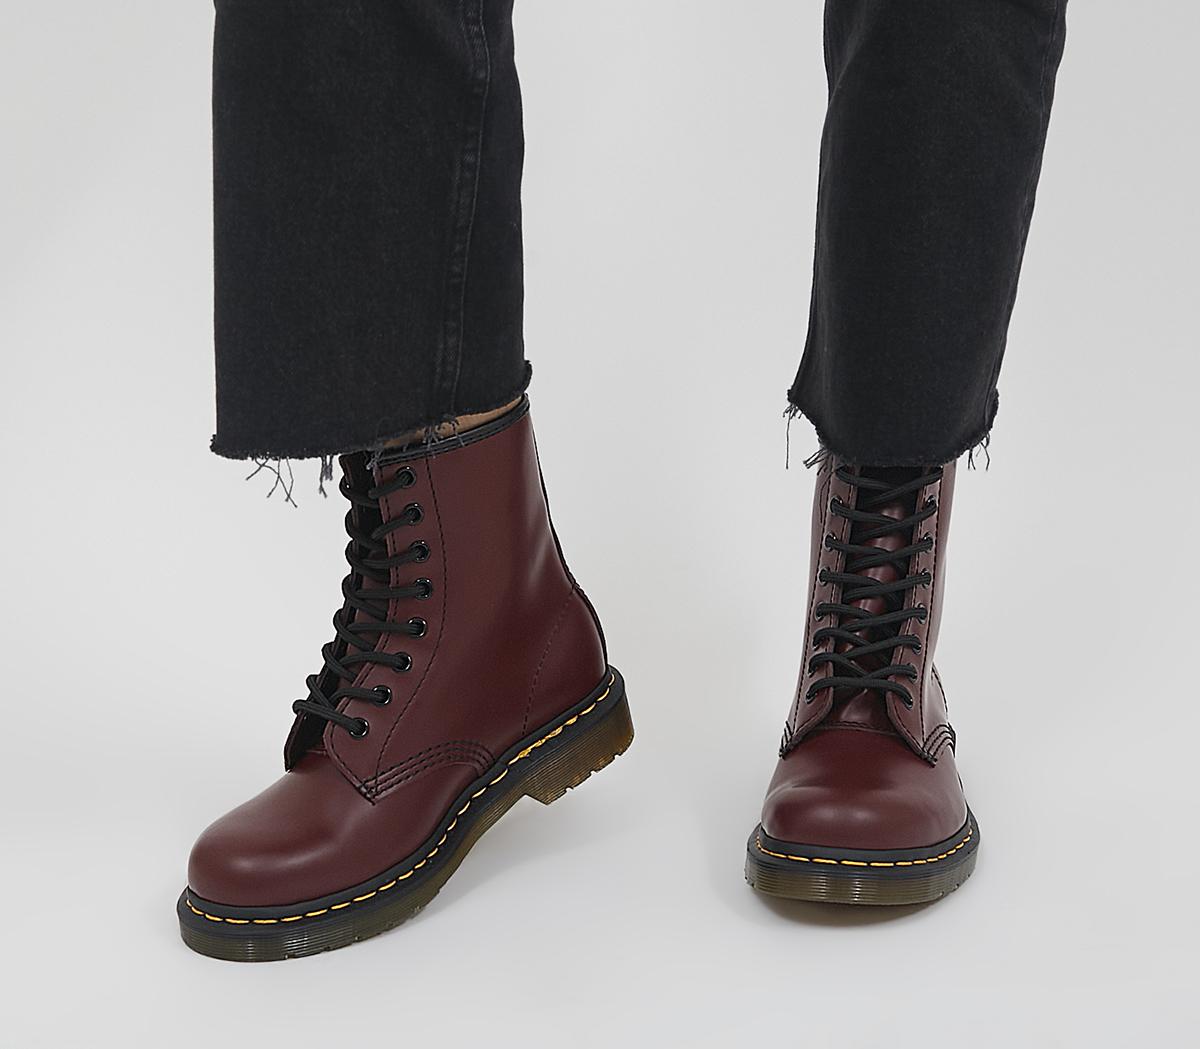 8 Eyelet Lace Up Bt Cherry Red Boots